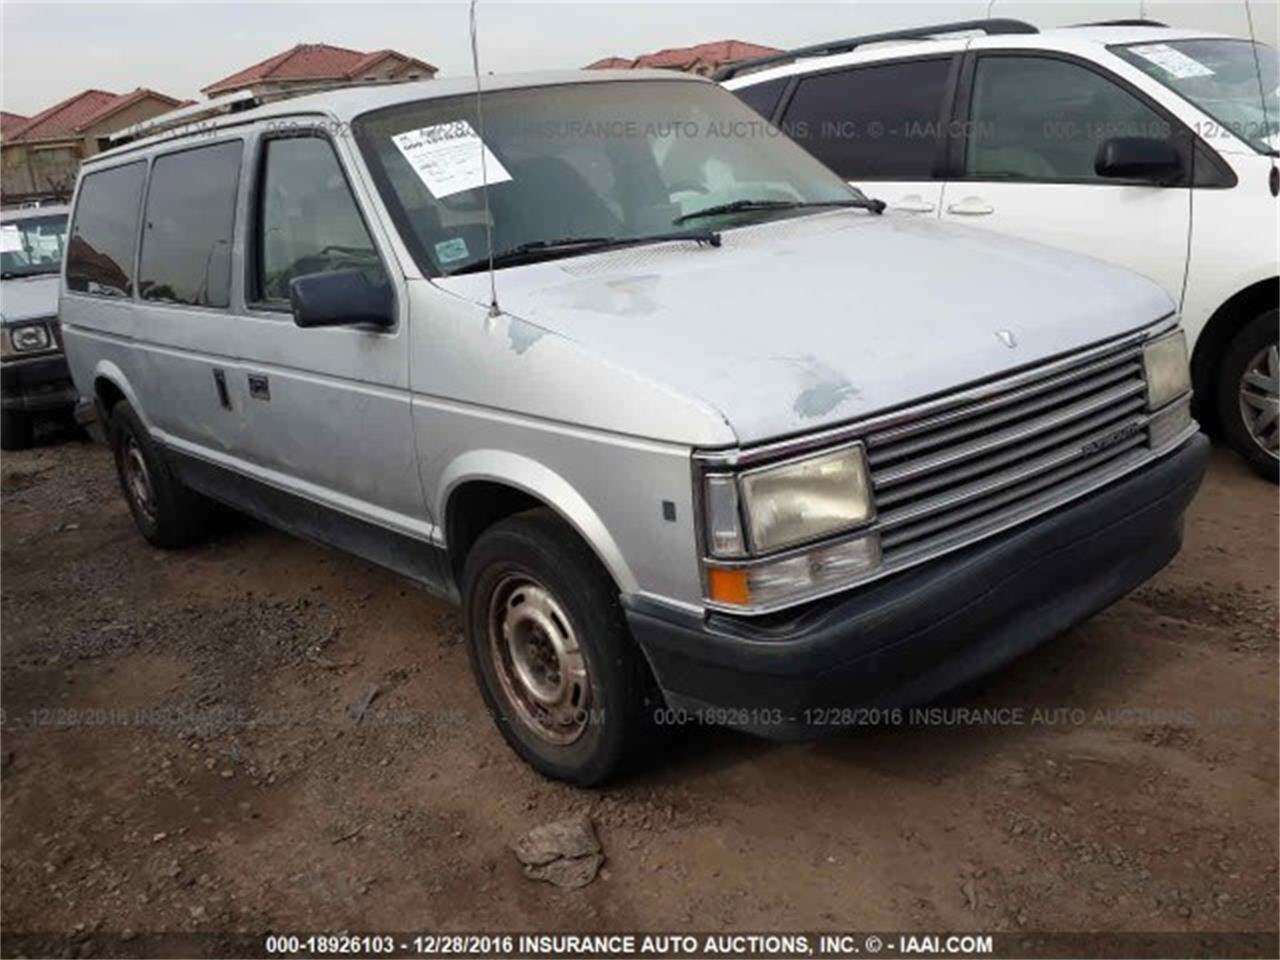 89 plymouth voyager